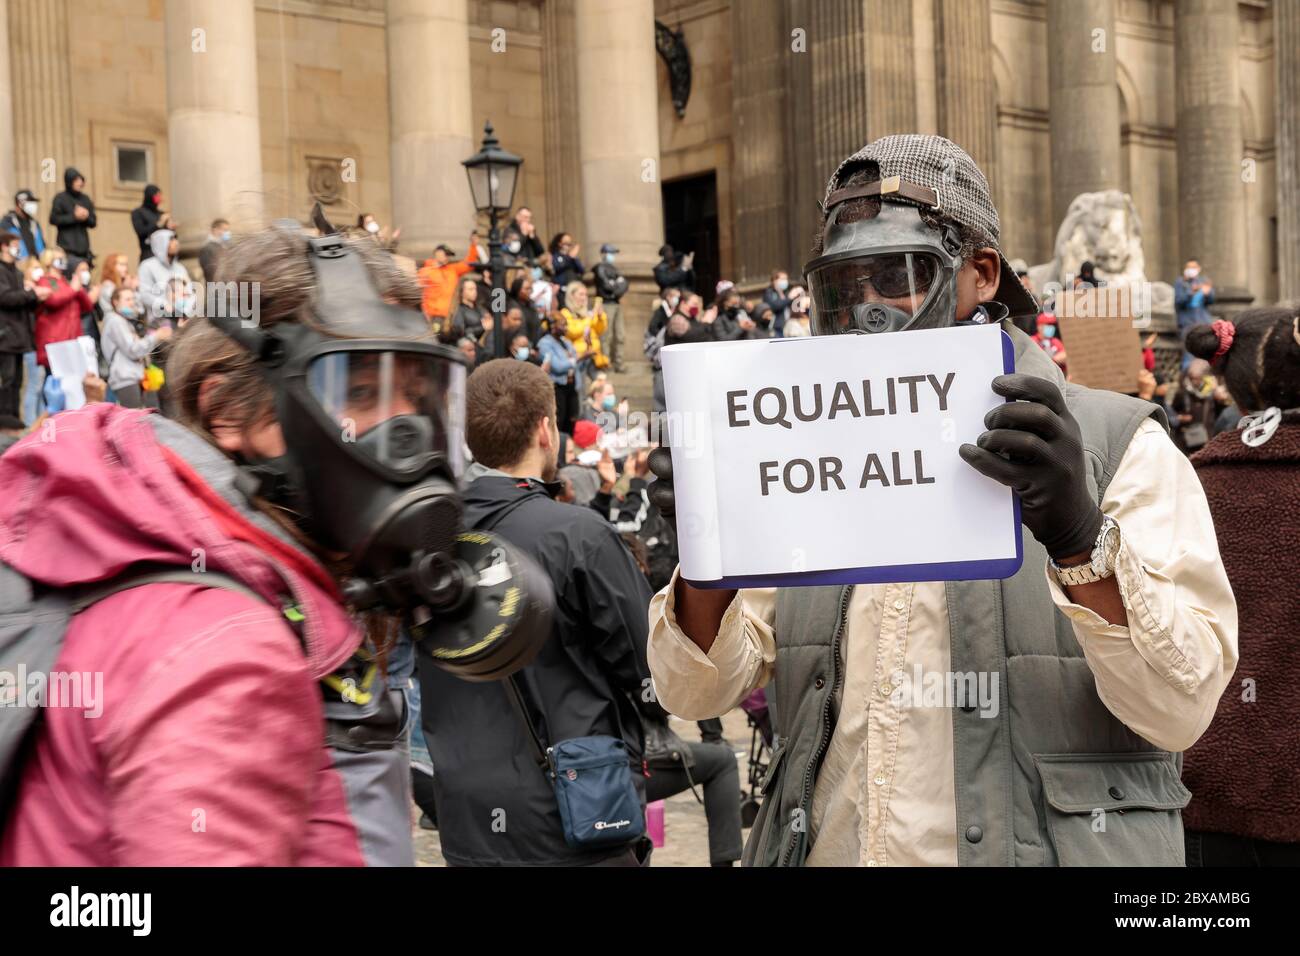 Protestors wearing respirators at black lives matter protest holding 'equality for all' sign. Saturday June 6th 2020, Leeds, West Yorkshire, England. Hundreds of people gather outside the city's town hall to protest against racism and violence towards BAME persons, following the death of George Floyd in the USA. ©Ian Wray/Alamy Stock Photo